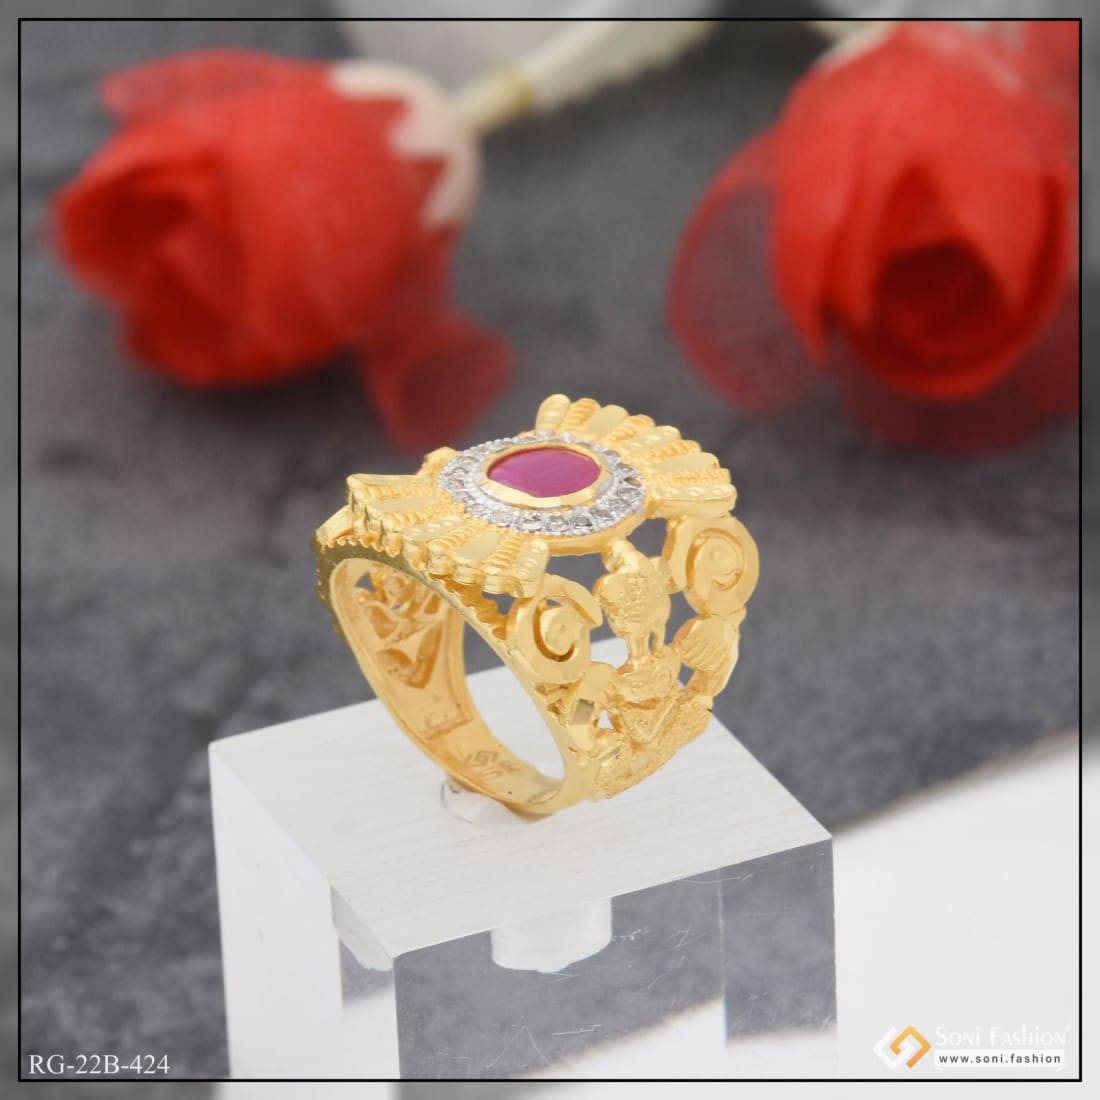 Birthstone Family Ring Mounting - Quality Gold